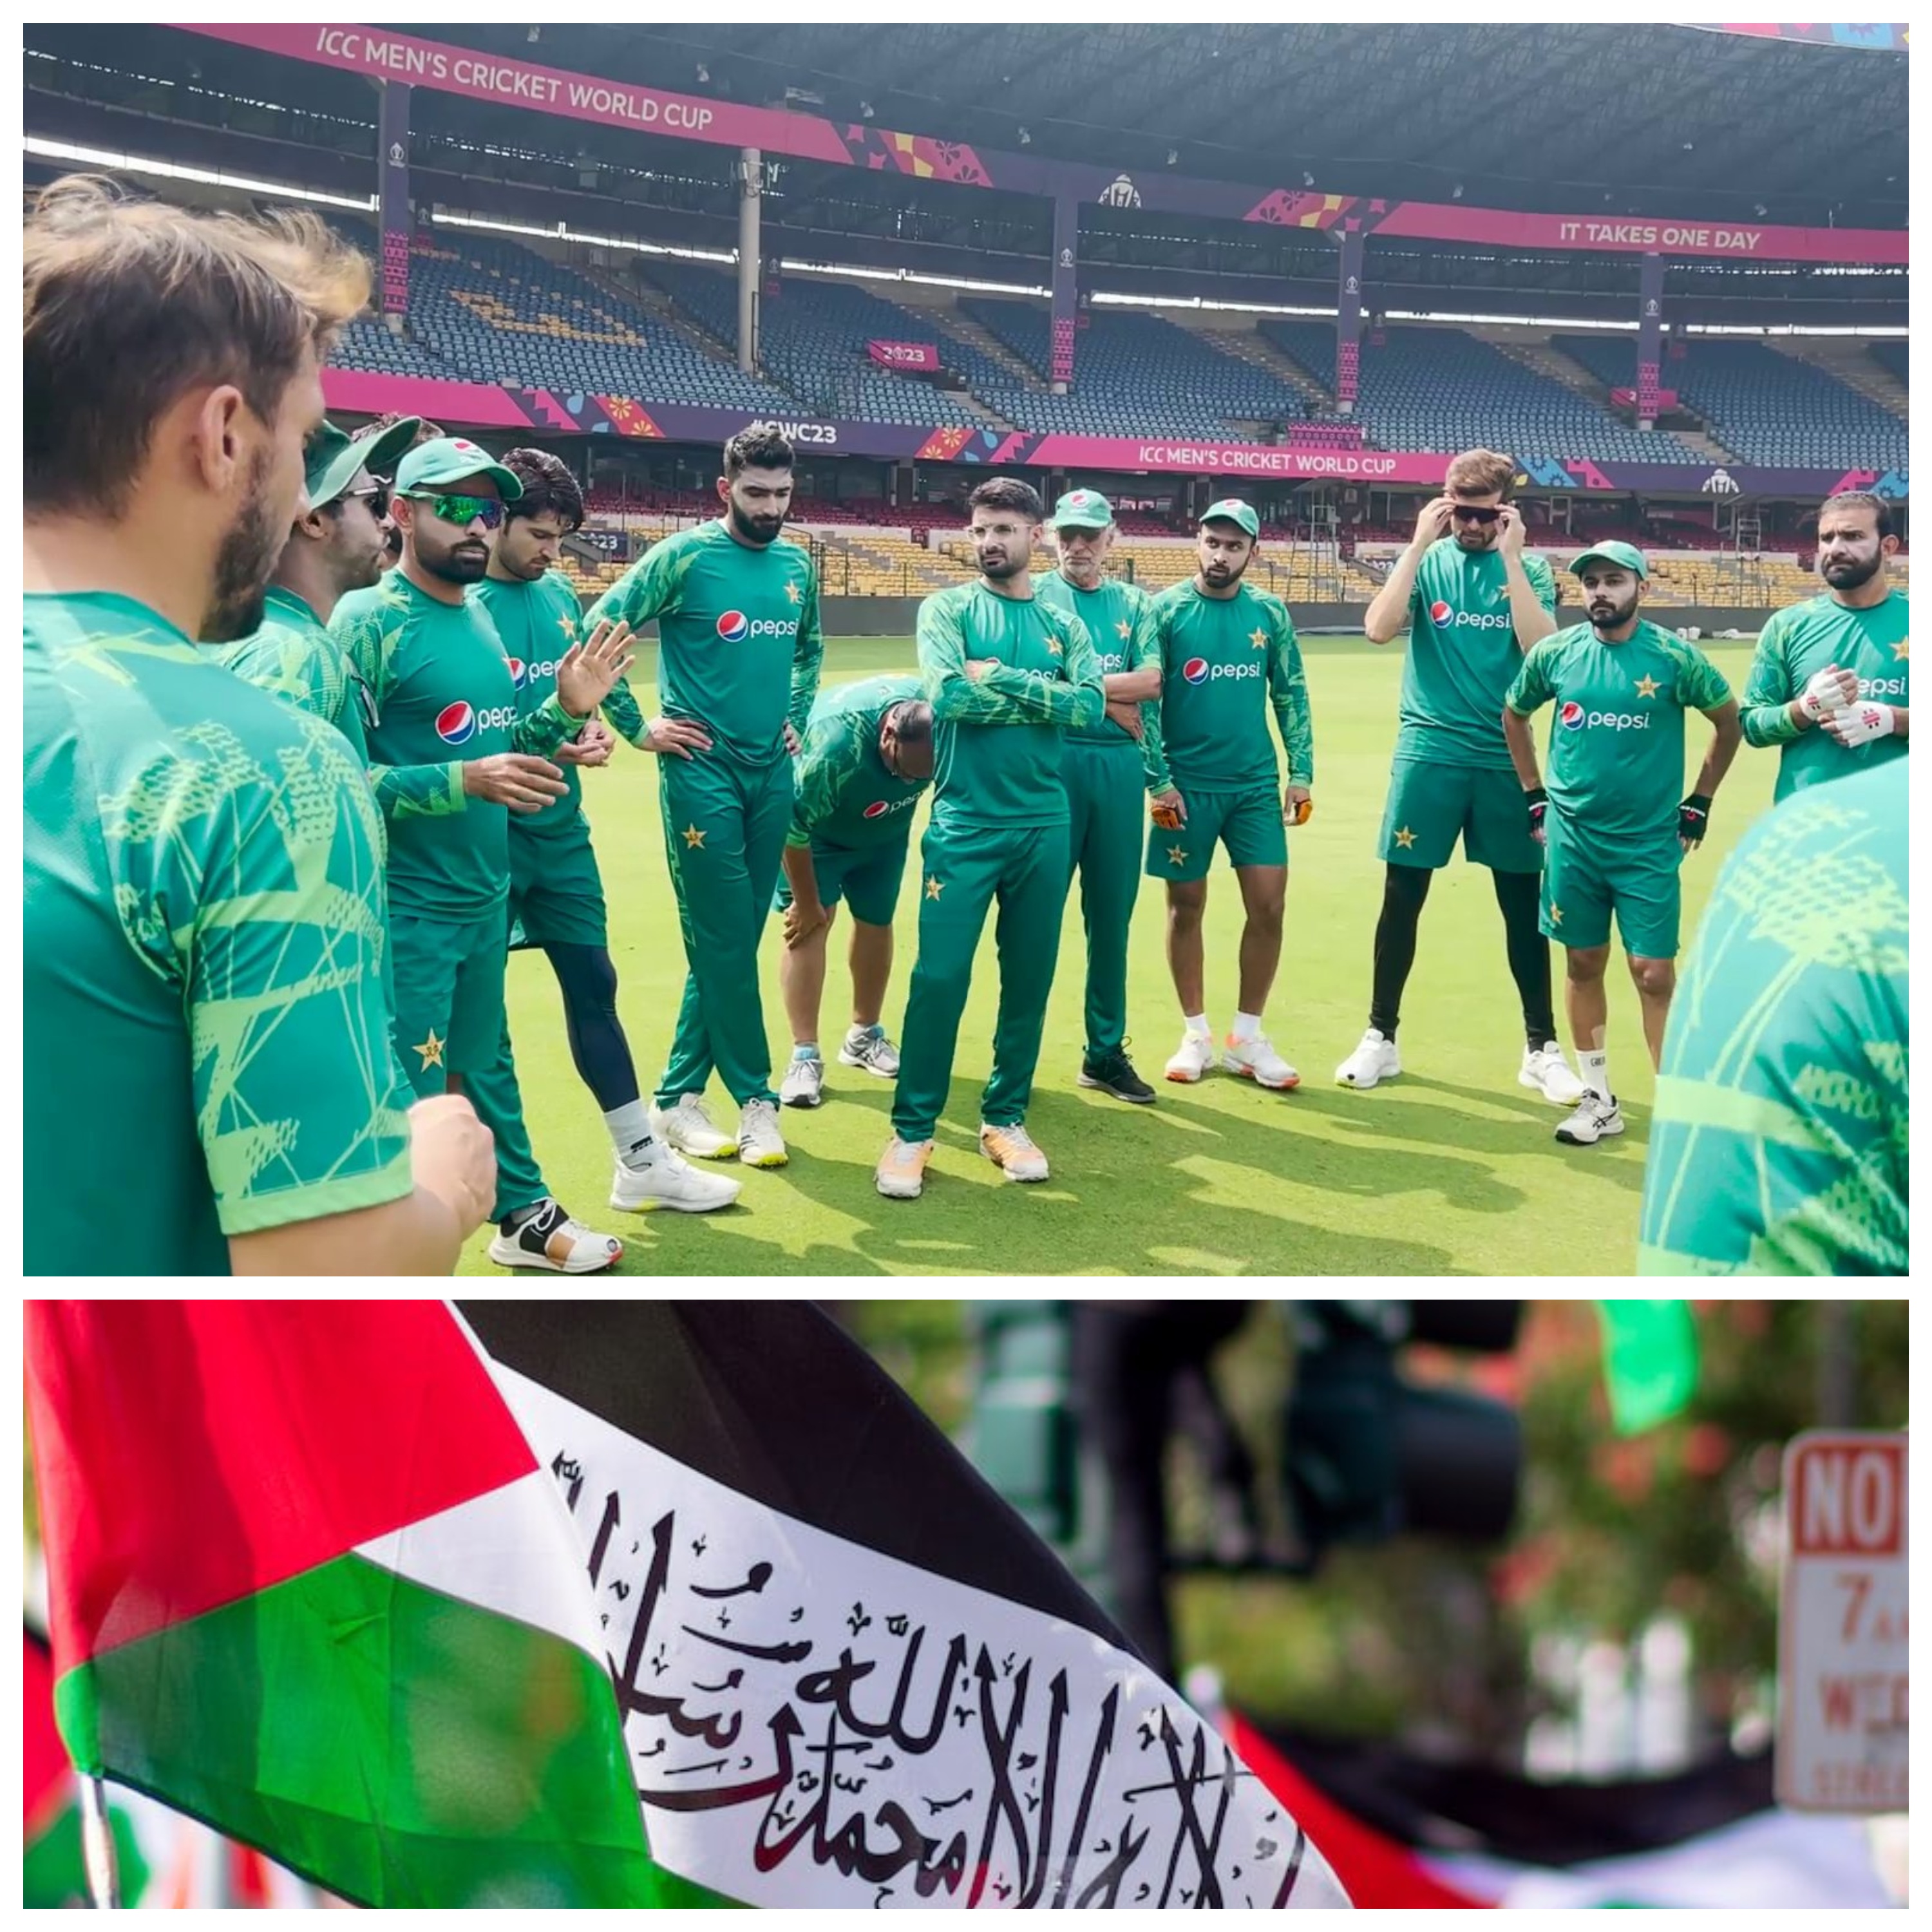 These big Pakistani cricketers came in support of Palestine